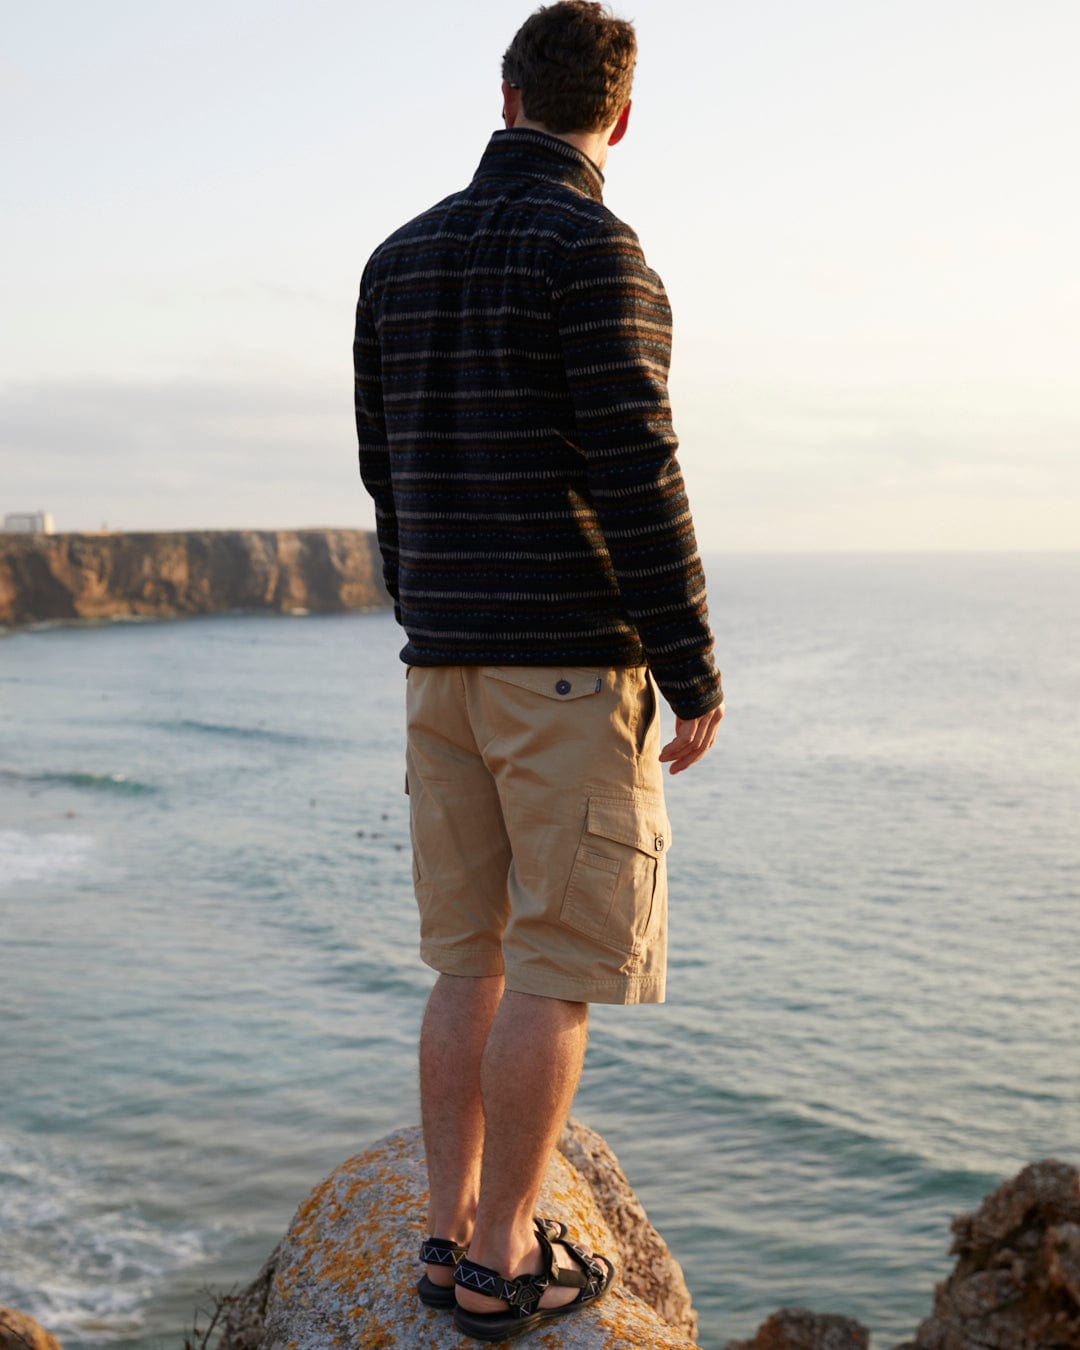 Man standing on a rock overlooking the ocean at sunset, his Saltrock Penwith II - Mens Cargo Shorts in Cream subtly outlined against the fading light.